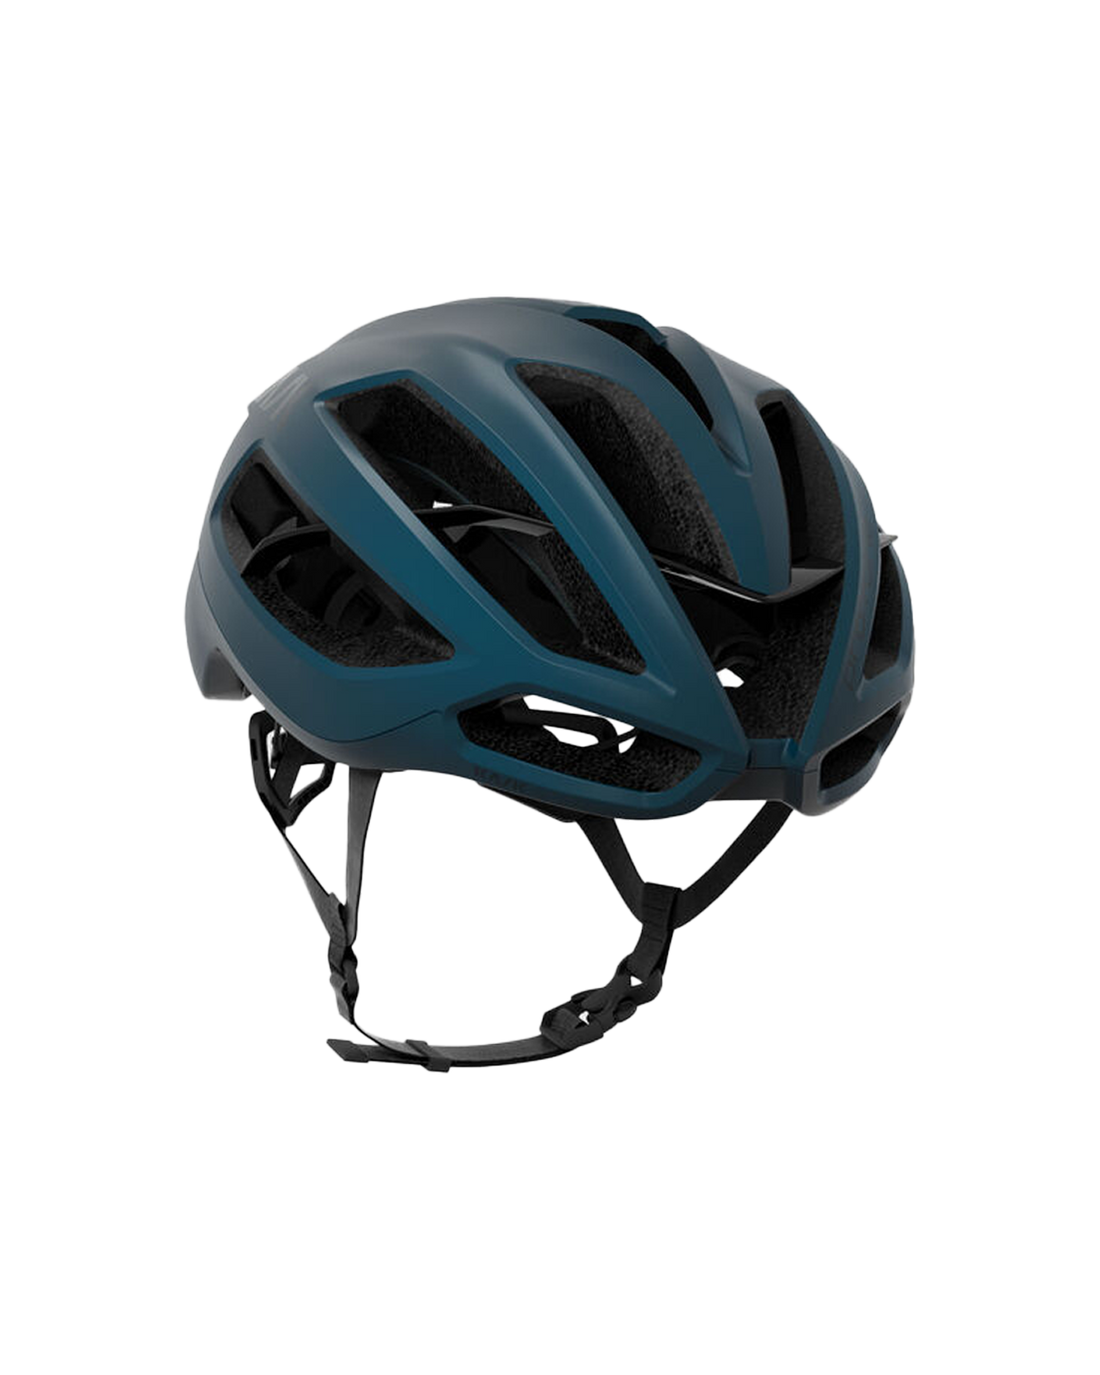 Kask Protone Icon ヘルメット - フォレスト グリーン